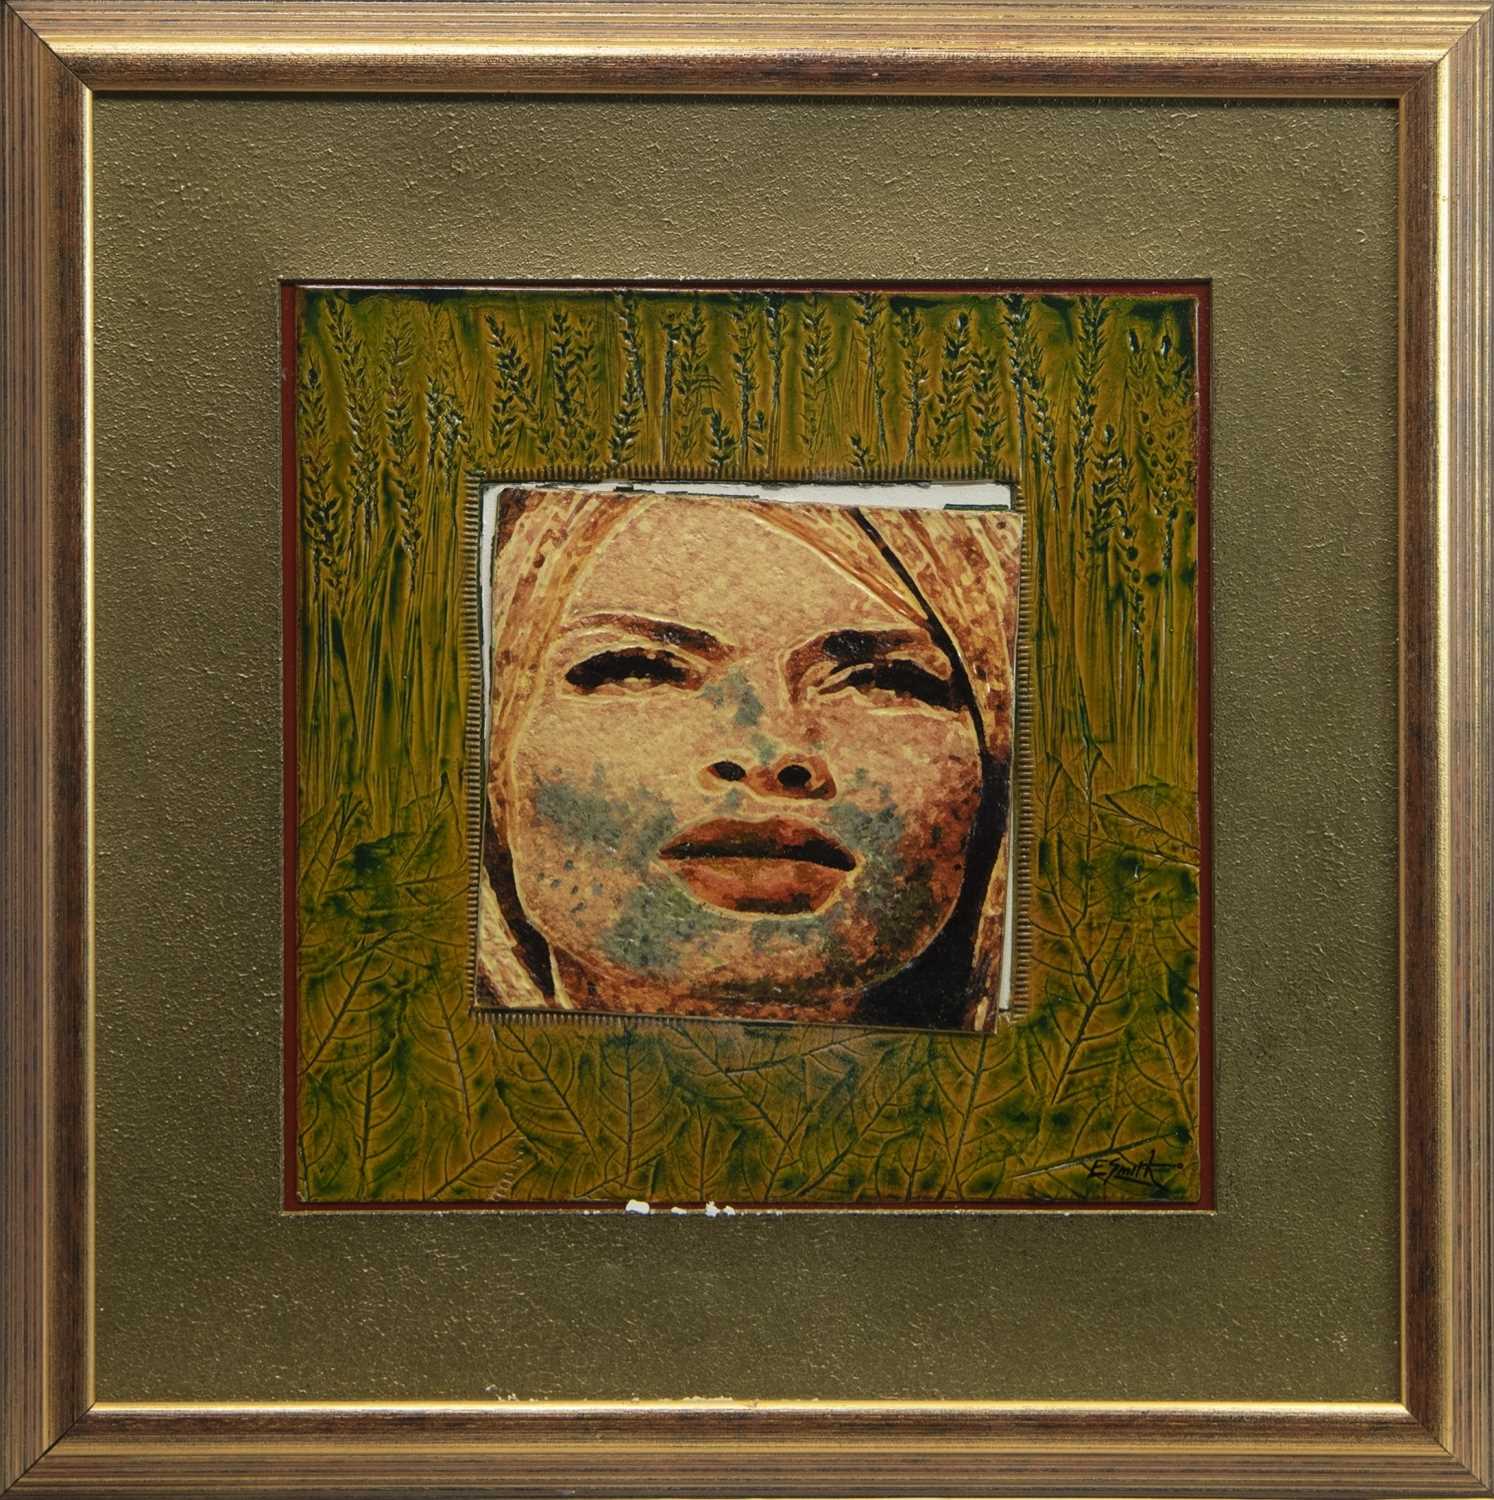 Lot 57 - DAWN, A CERAMIC TILE BY ED SMITH